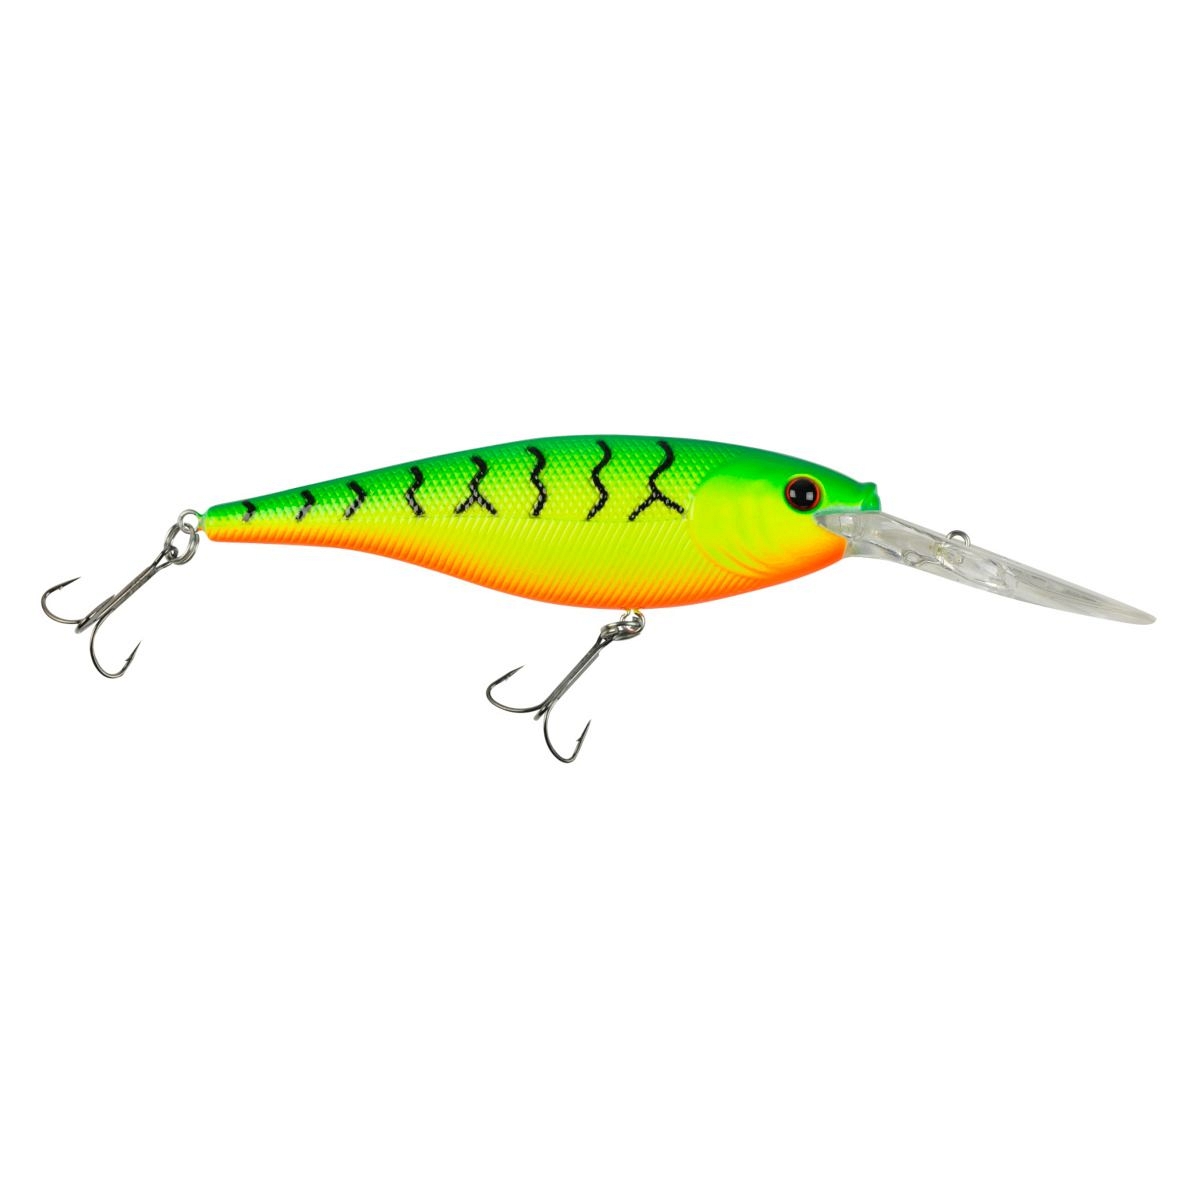  Berkley Flicker Shad Fishing Lure, Blue Tiger, 1/2 oz, 3 1/2in   9cm Crankbaits, Size, Profile and Dive Depth Imitates Real Shad, Equipped  with Fusion19 Hook : Sports & Outdoors